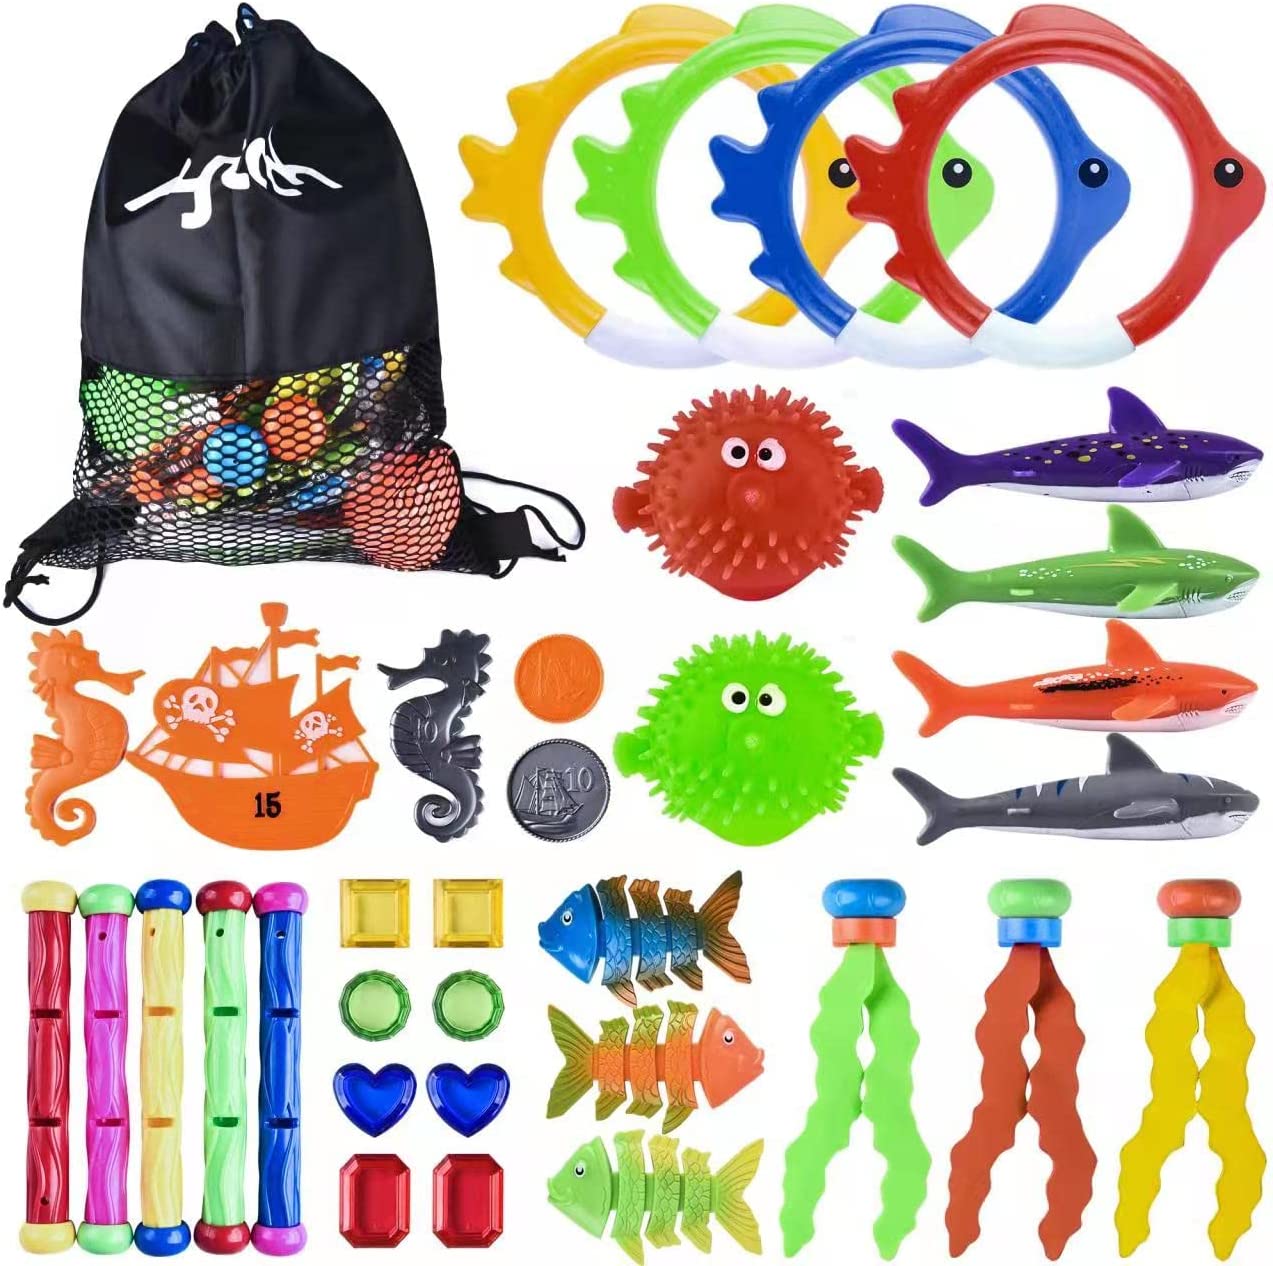 ''heytech 33 PCS Dive TOYS Pool TOYS for Kids Includes 4 Diving Sticks, 4 Diving Rings, 5 Pirate Trea